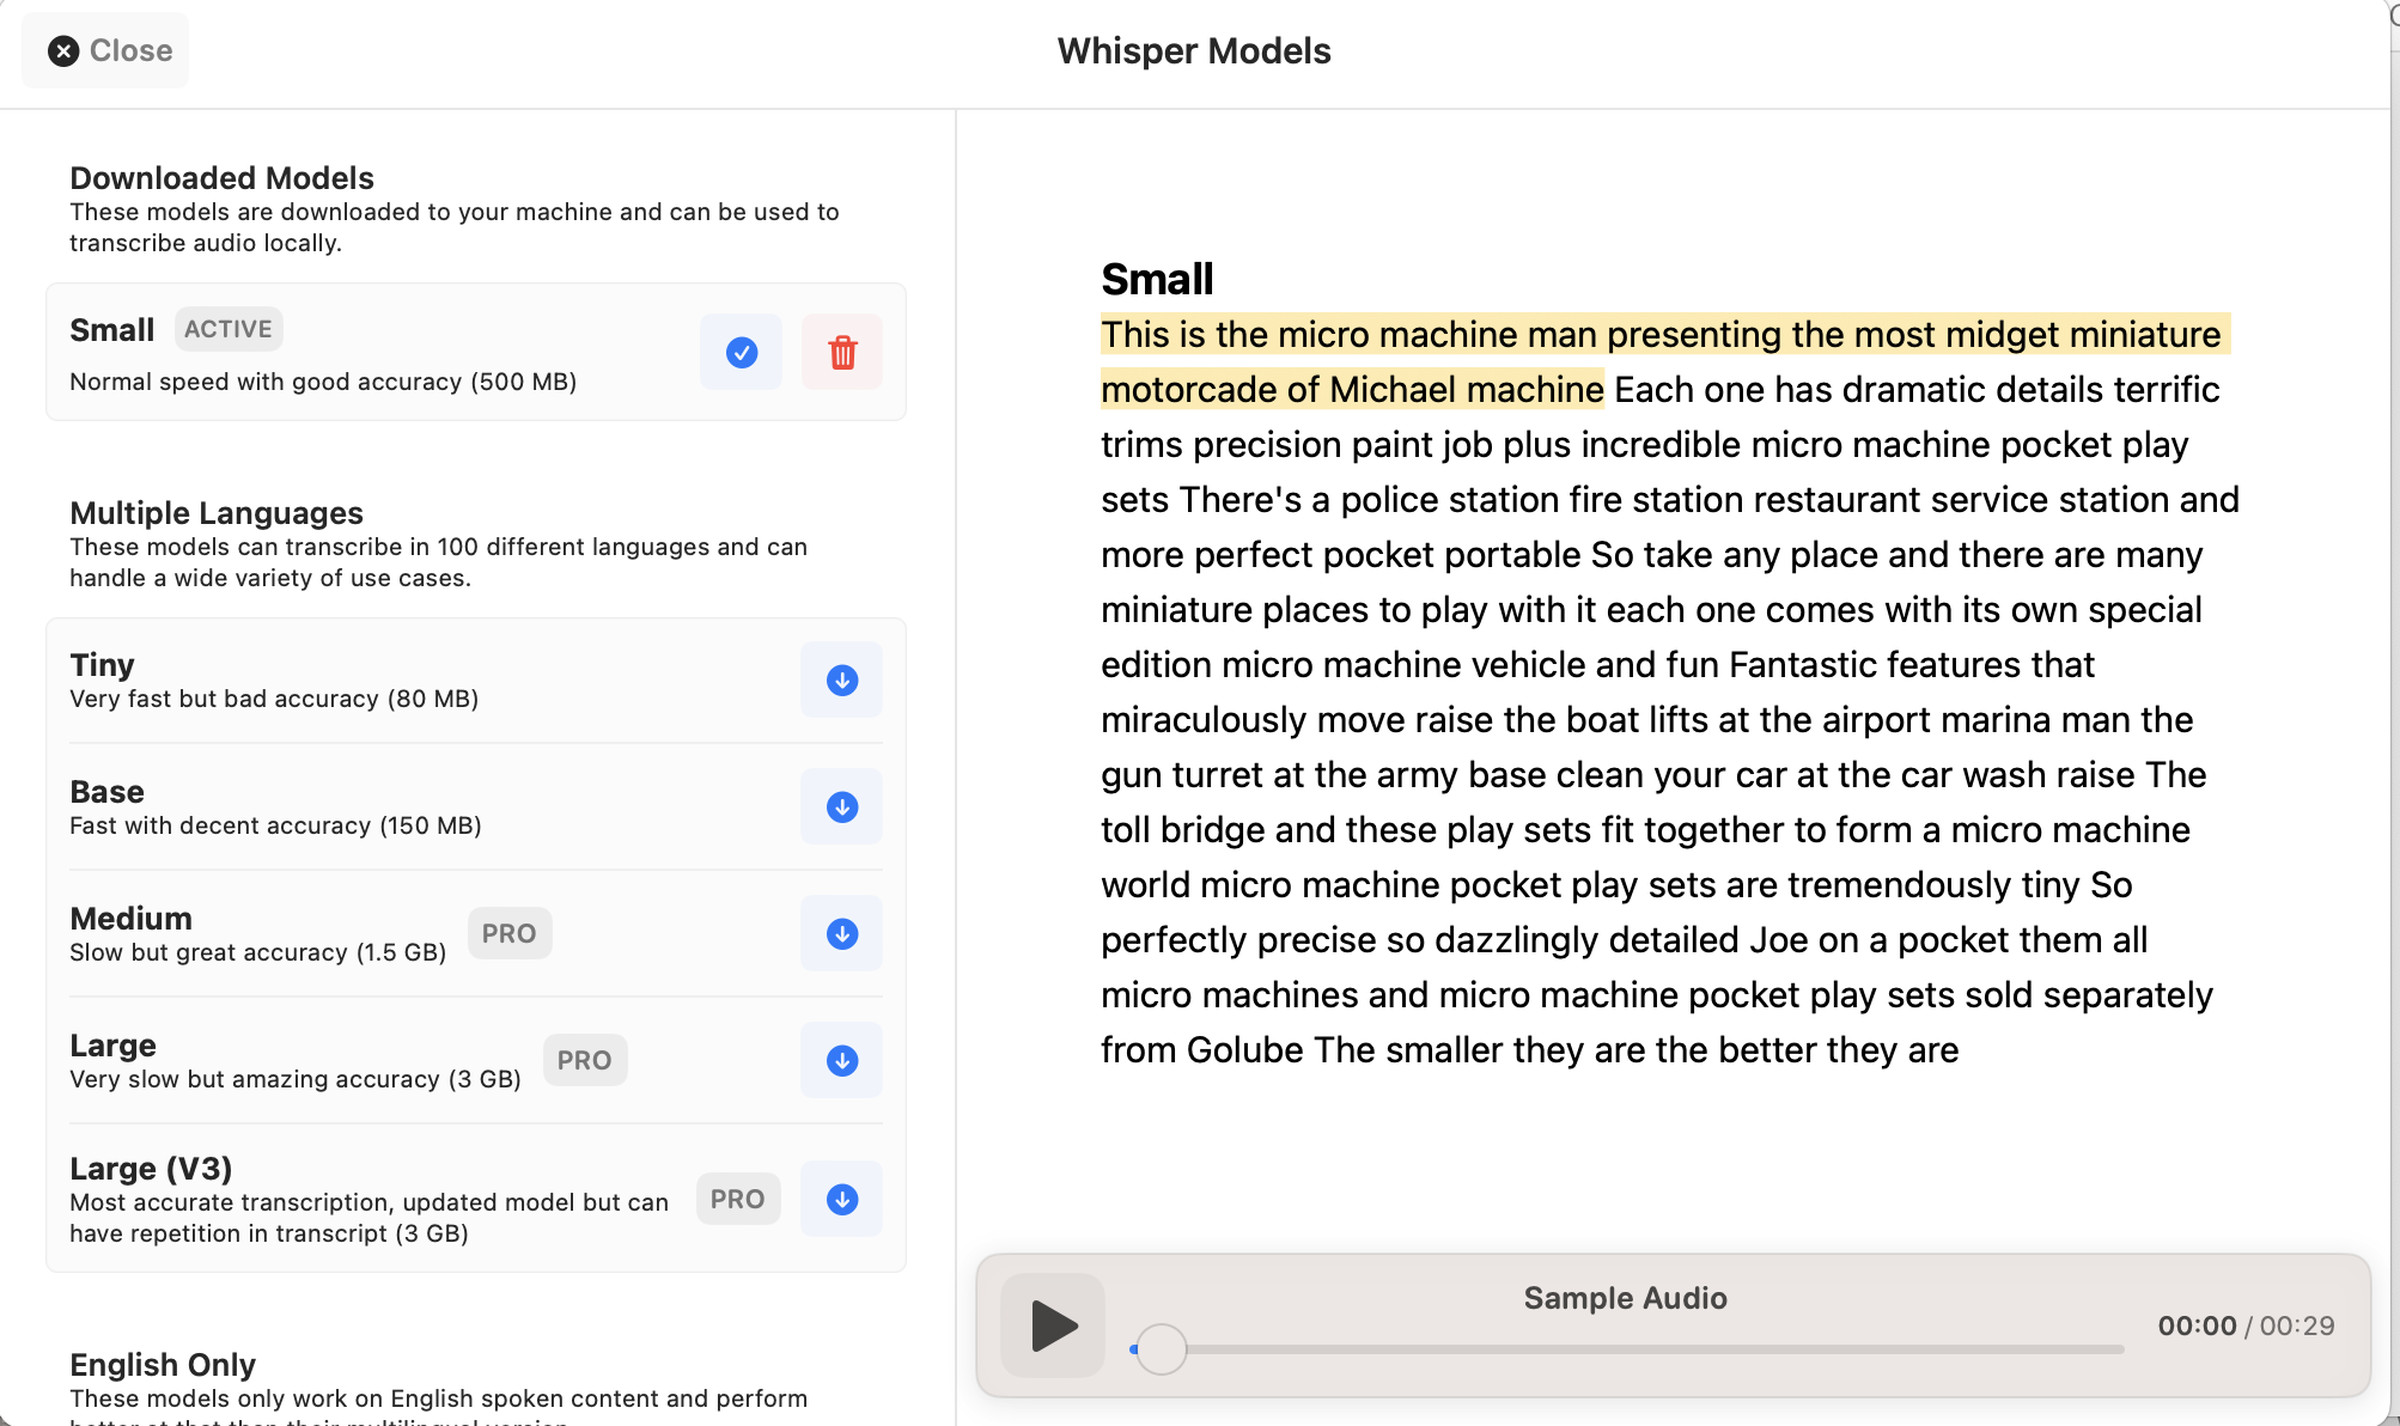 Whisper page with different models (such as Tiny, Base, Medium, etc.) listed on the left, and a transcription of an advertisement on the right.